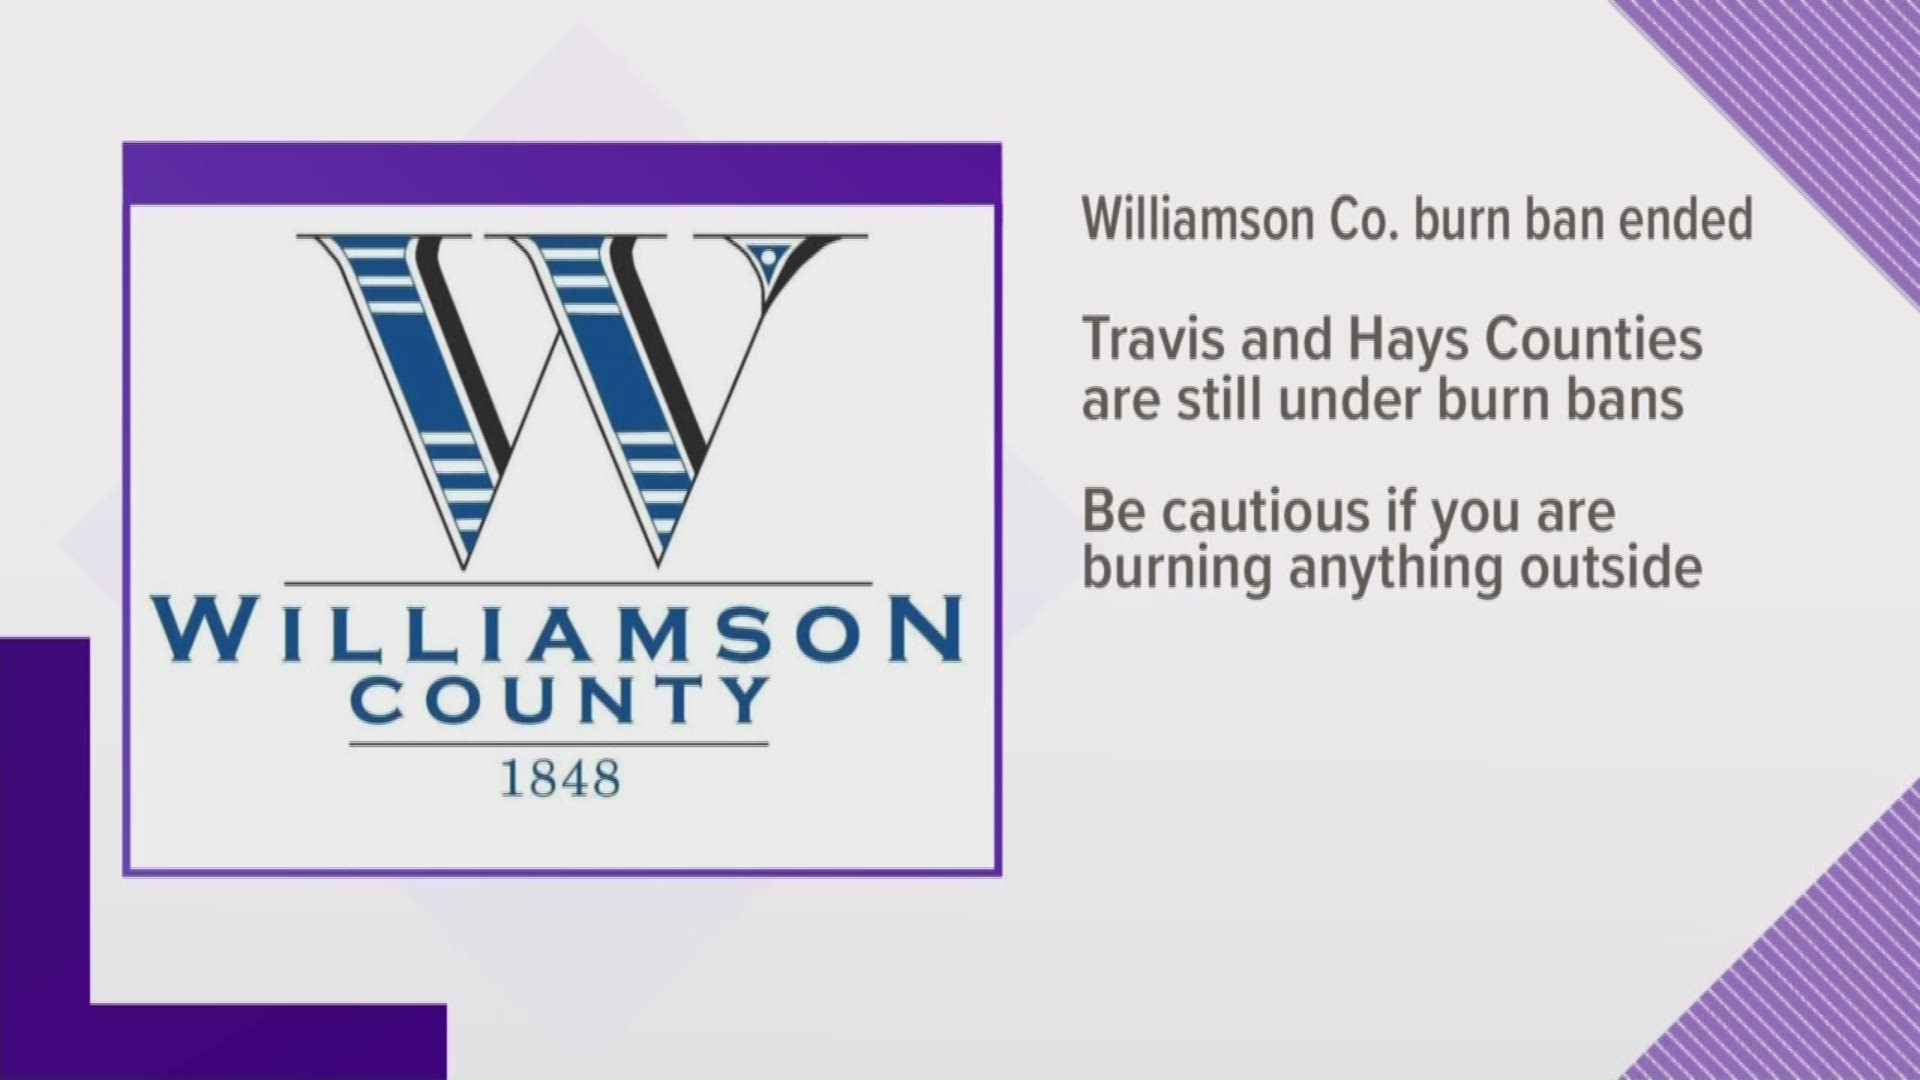 A burn ban in Williamson County is now over.